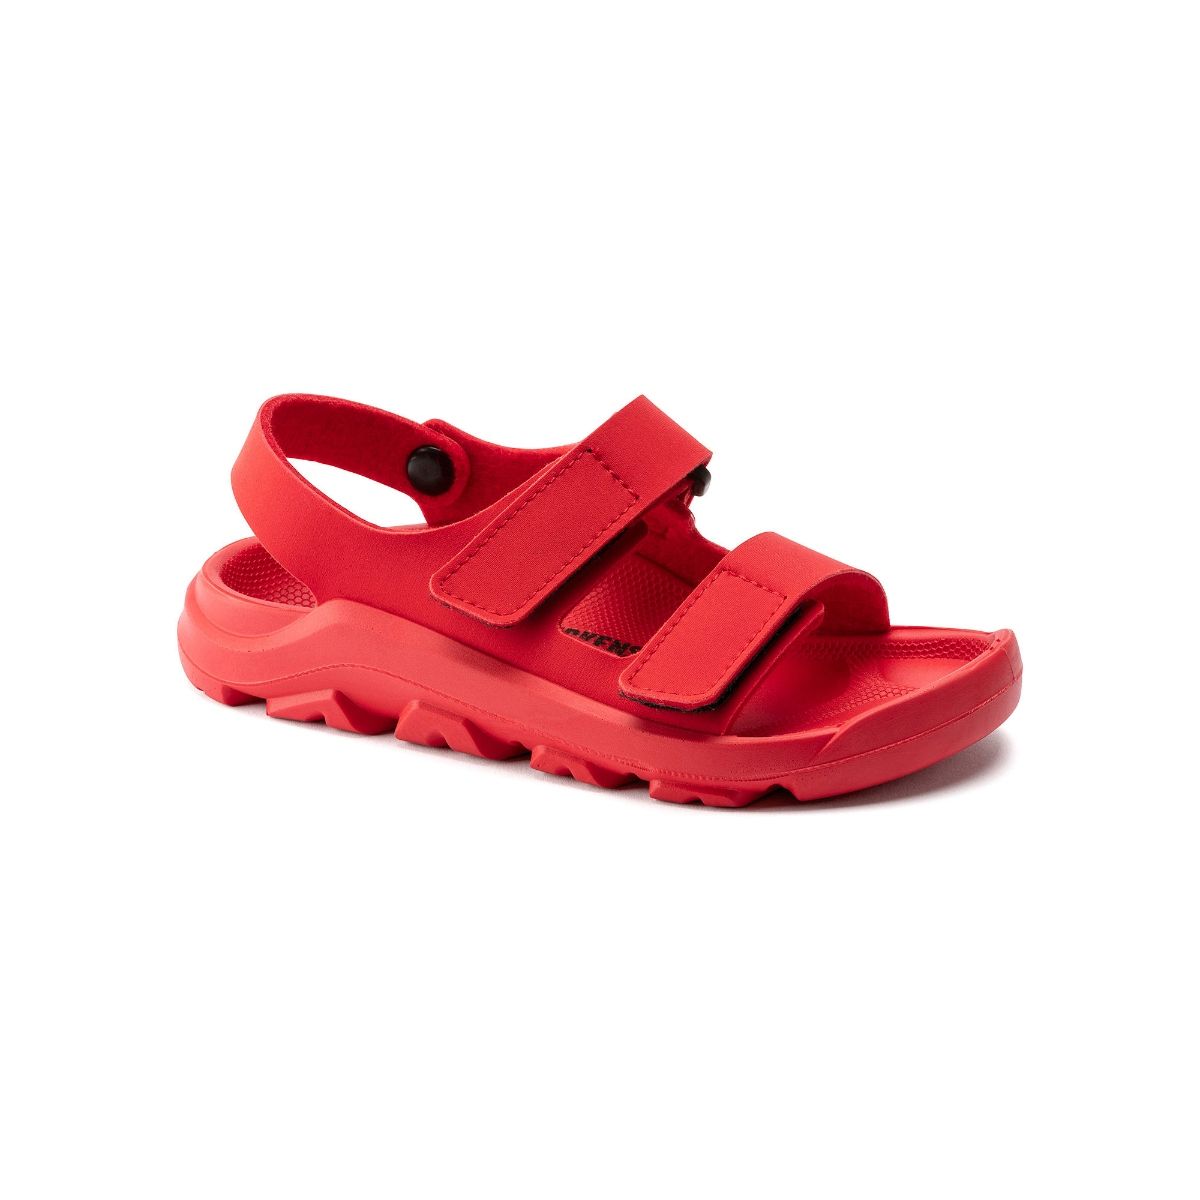 Buy Boys Casual Summer Sandals Online in India - Etsy